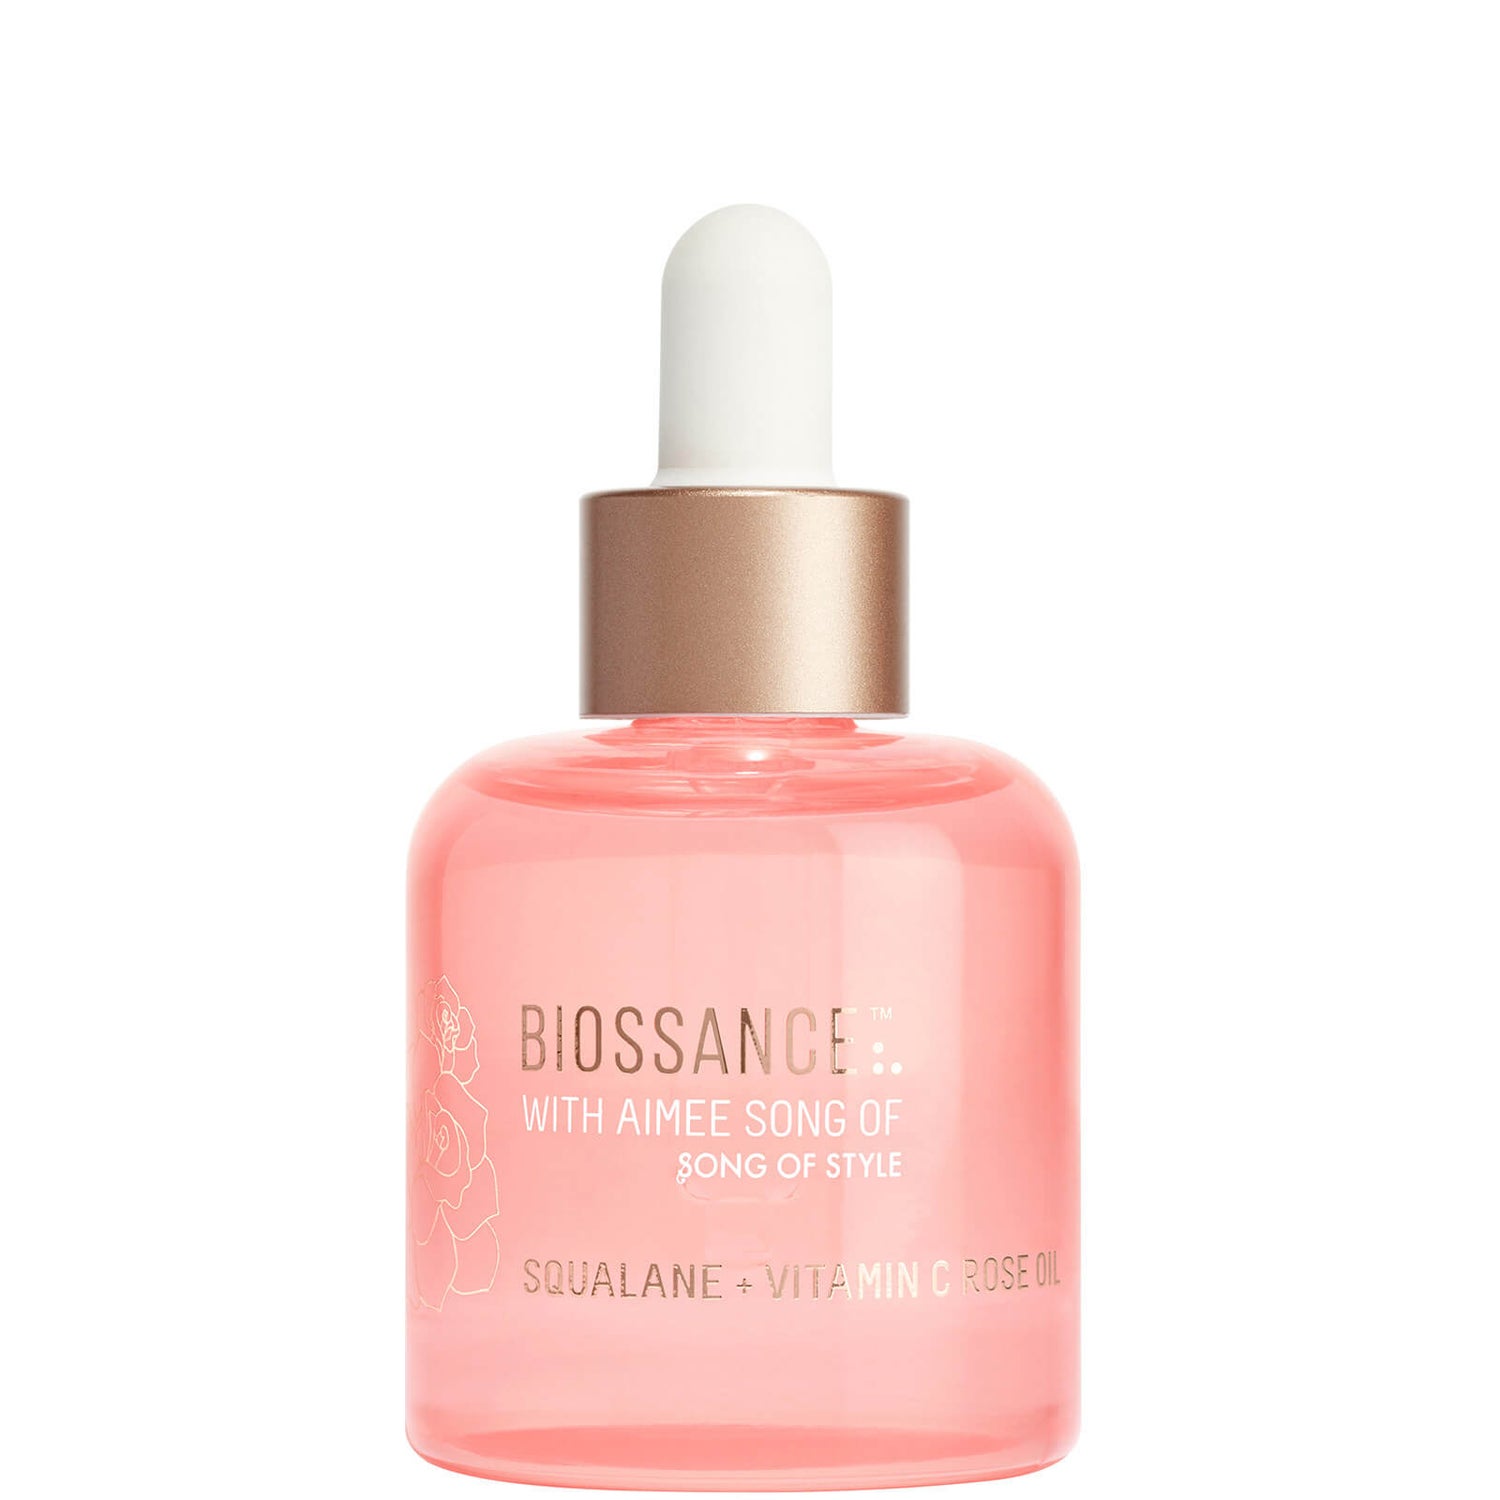 Biossance Squalane + Vitamin C Rose Oil with Aimee Song